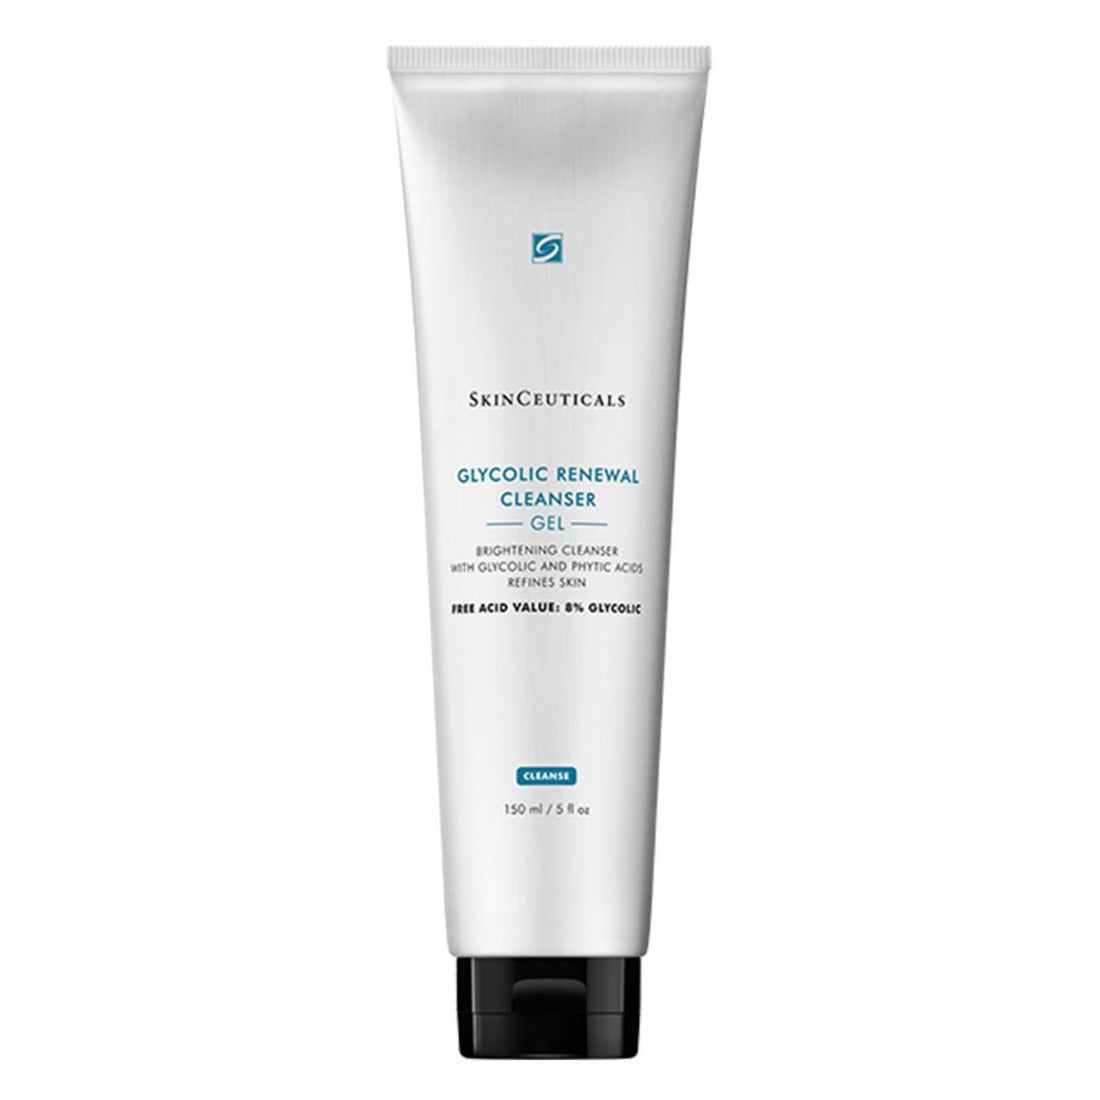 Skinceuticals Glycolic Renewal Cleanser 150mL